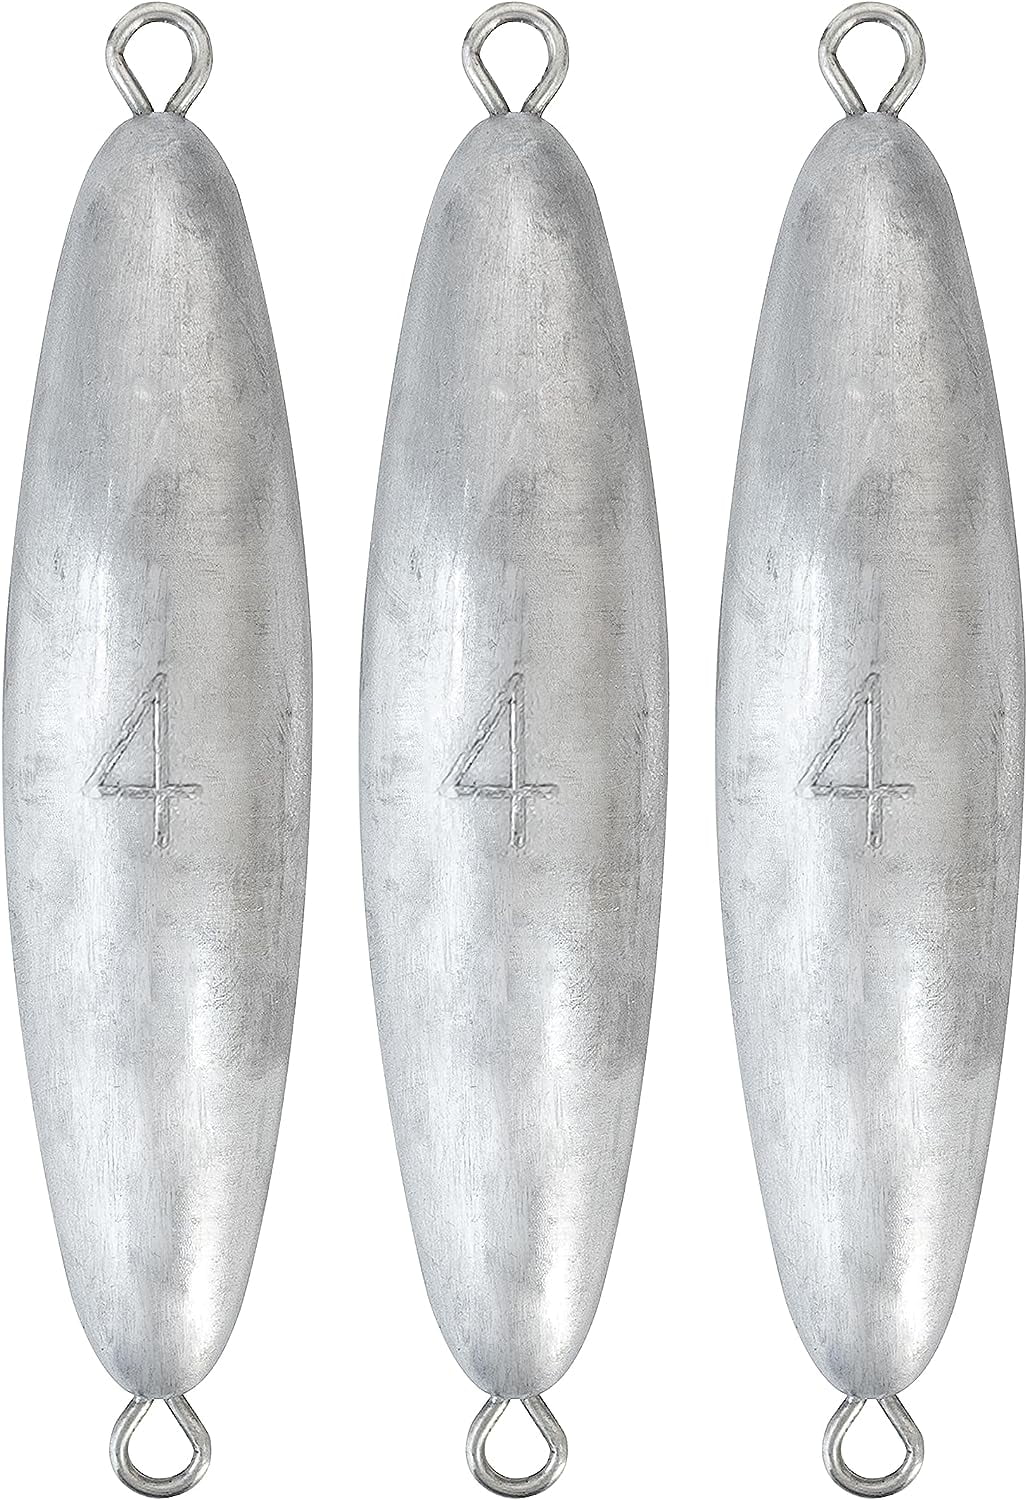 BLUEWING 20oz Torpedo Sinker 2pcs Fishing Weight Sinkers Saltwater Bullet Lead  Fishing Sinkers Double Ringed Fishing Weights for Bottom Fishing 